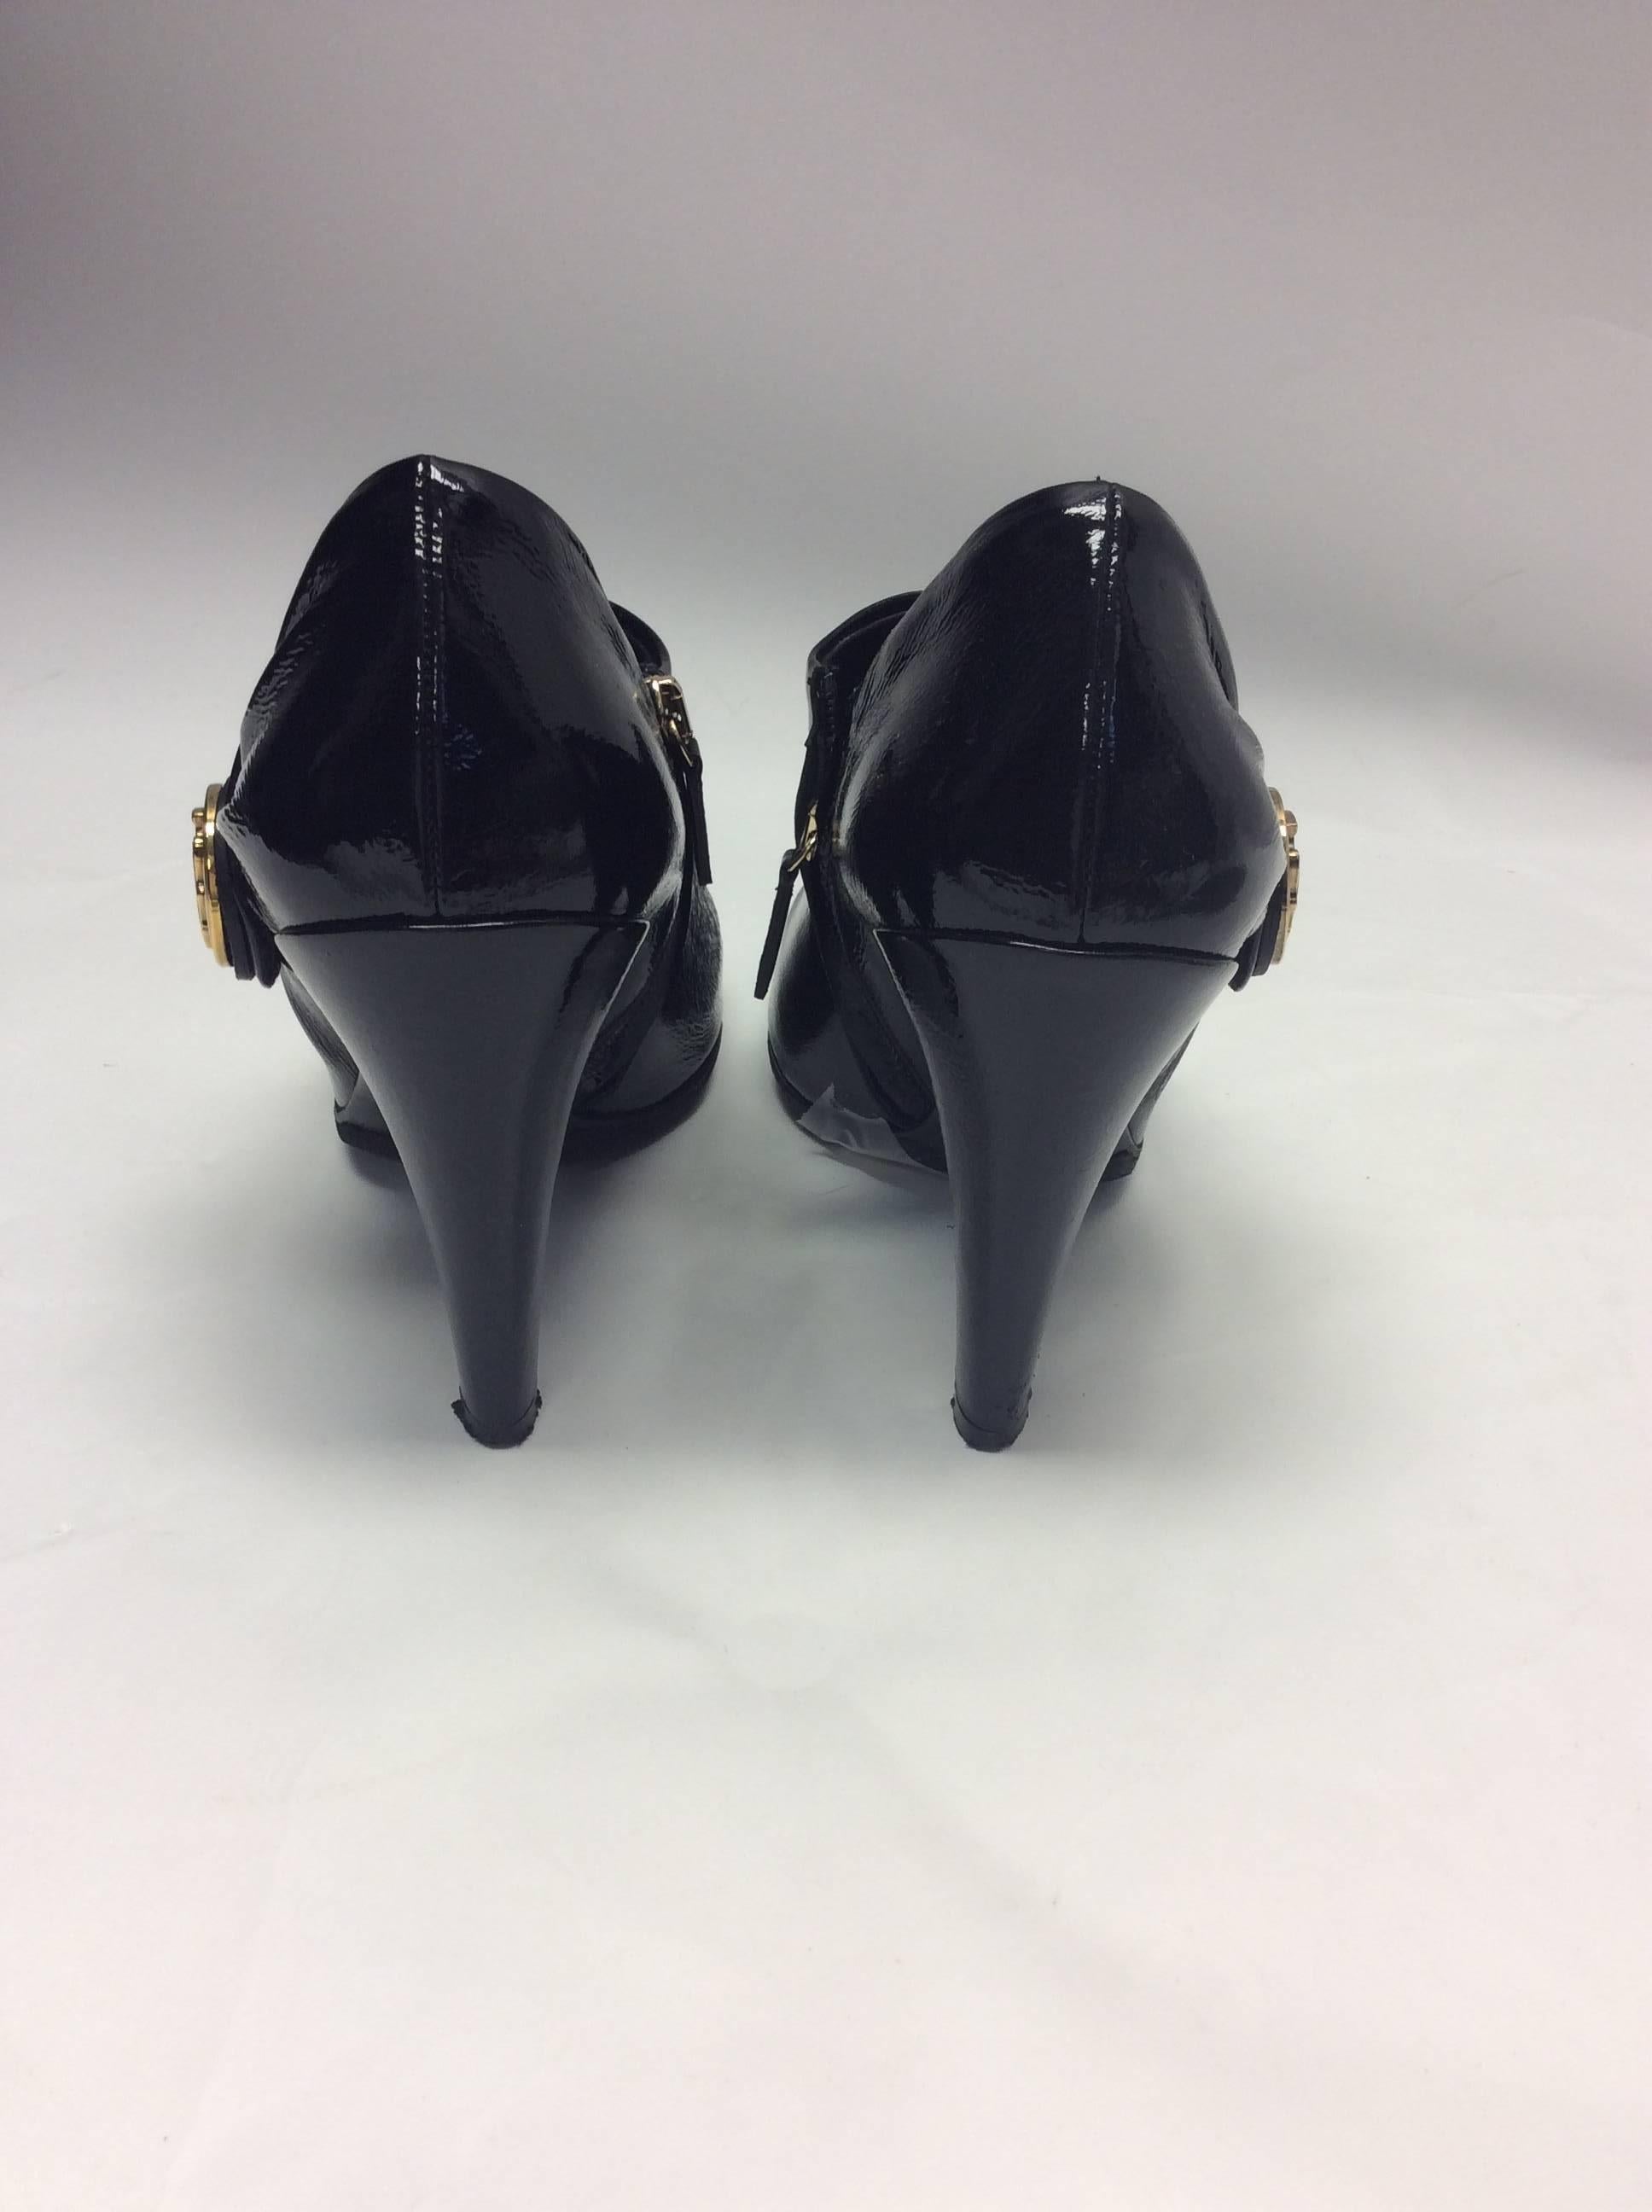 Gucci Patent Leather Short Ankle Booties In Excellent Condition For Sale In Narberth, PA